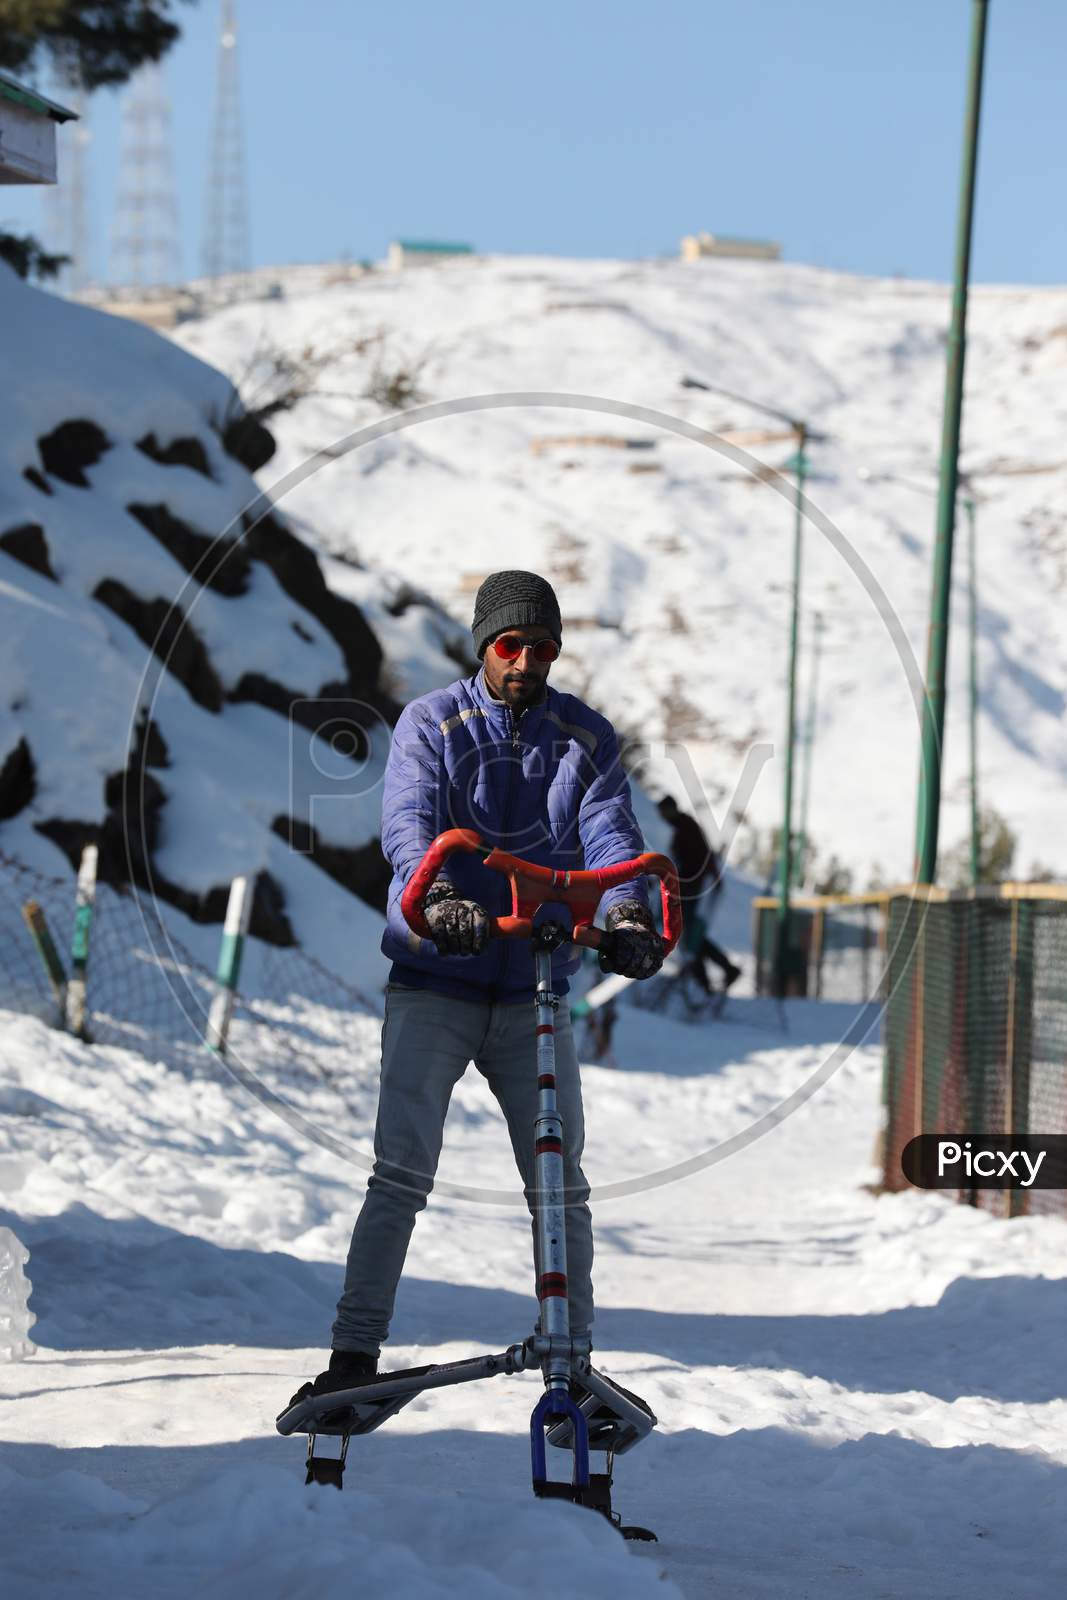 Tourist Play Snow Cart Drive At Nathatop About 110 Km From Jammu On Sunday.10 Jan,2021.